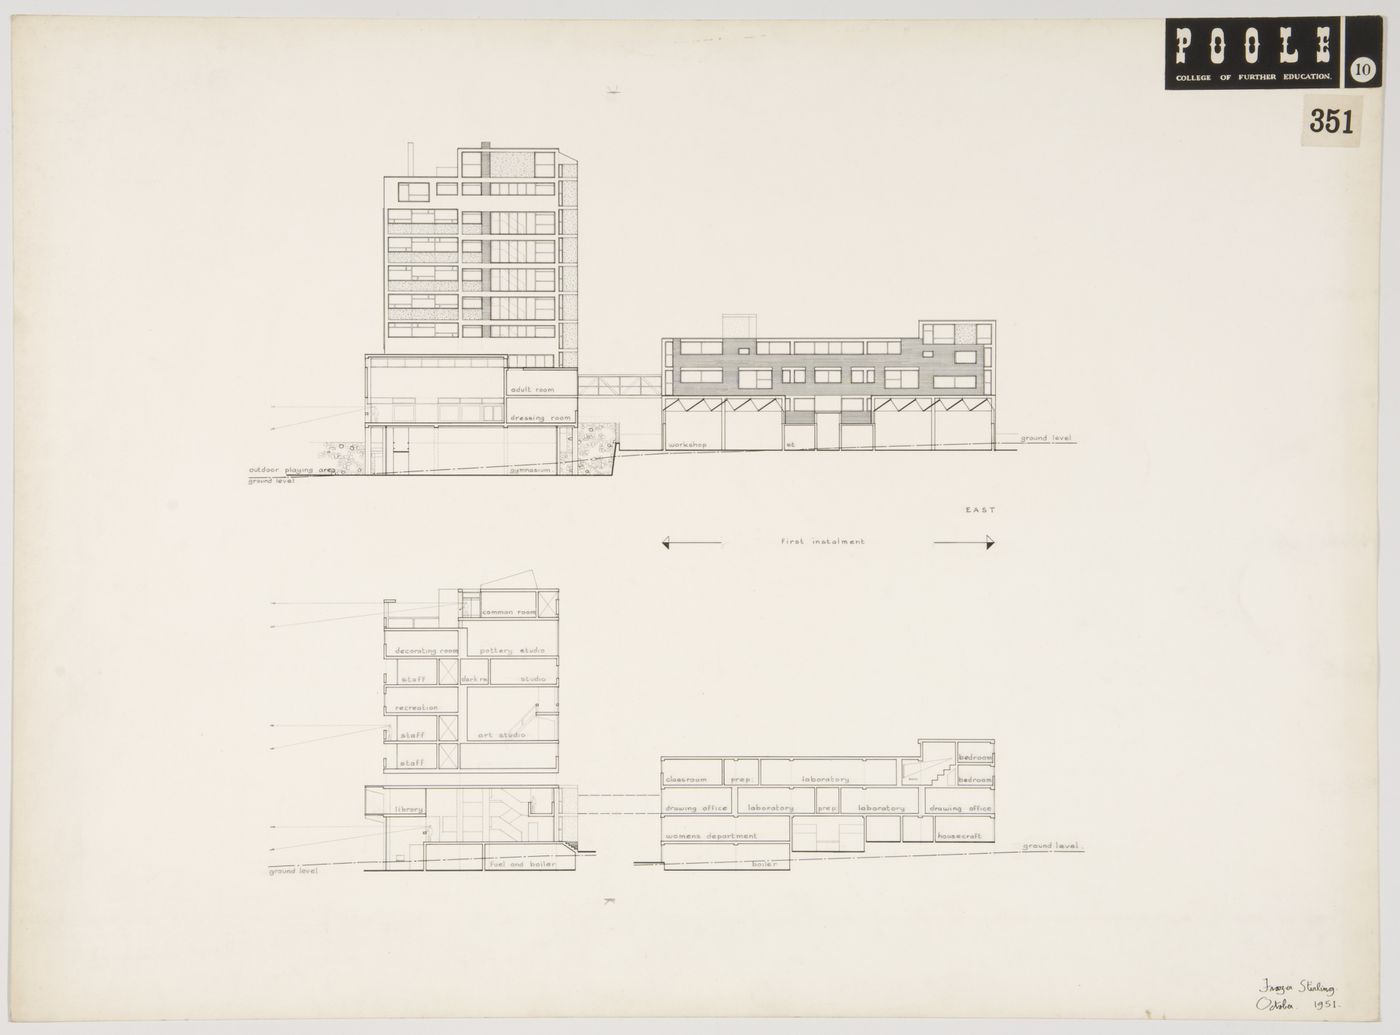 Elevation and section for Poole College of Further Education, Poole, England